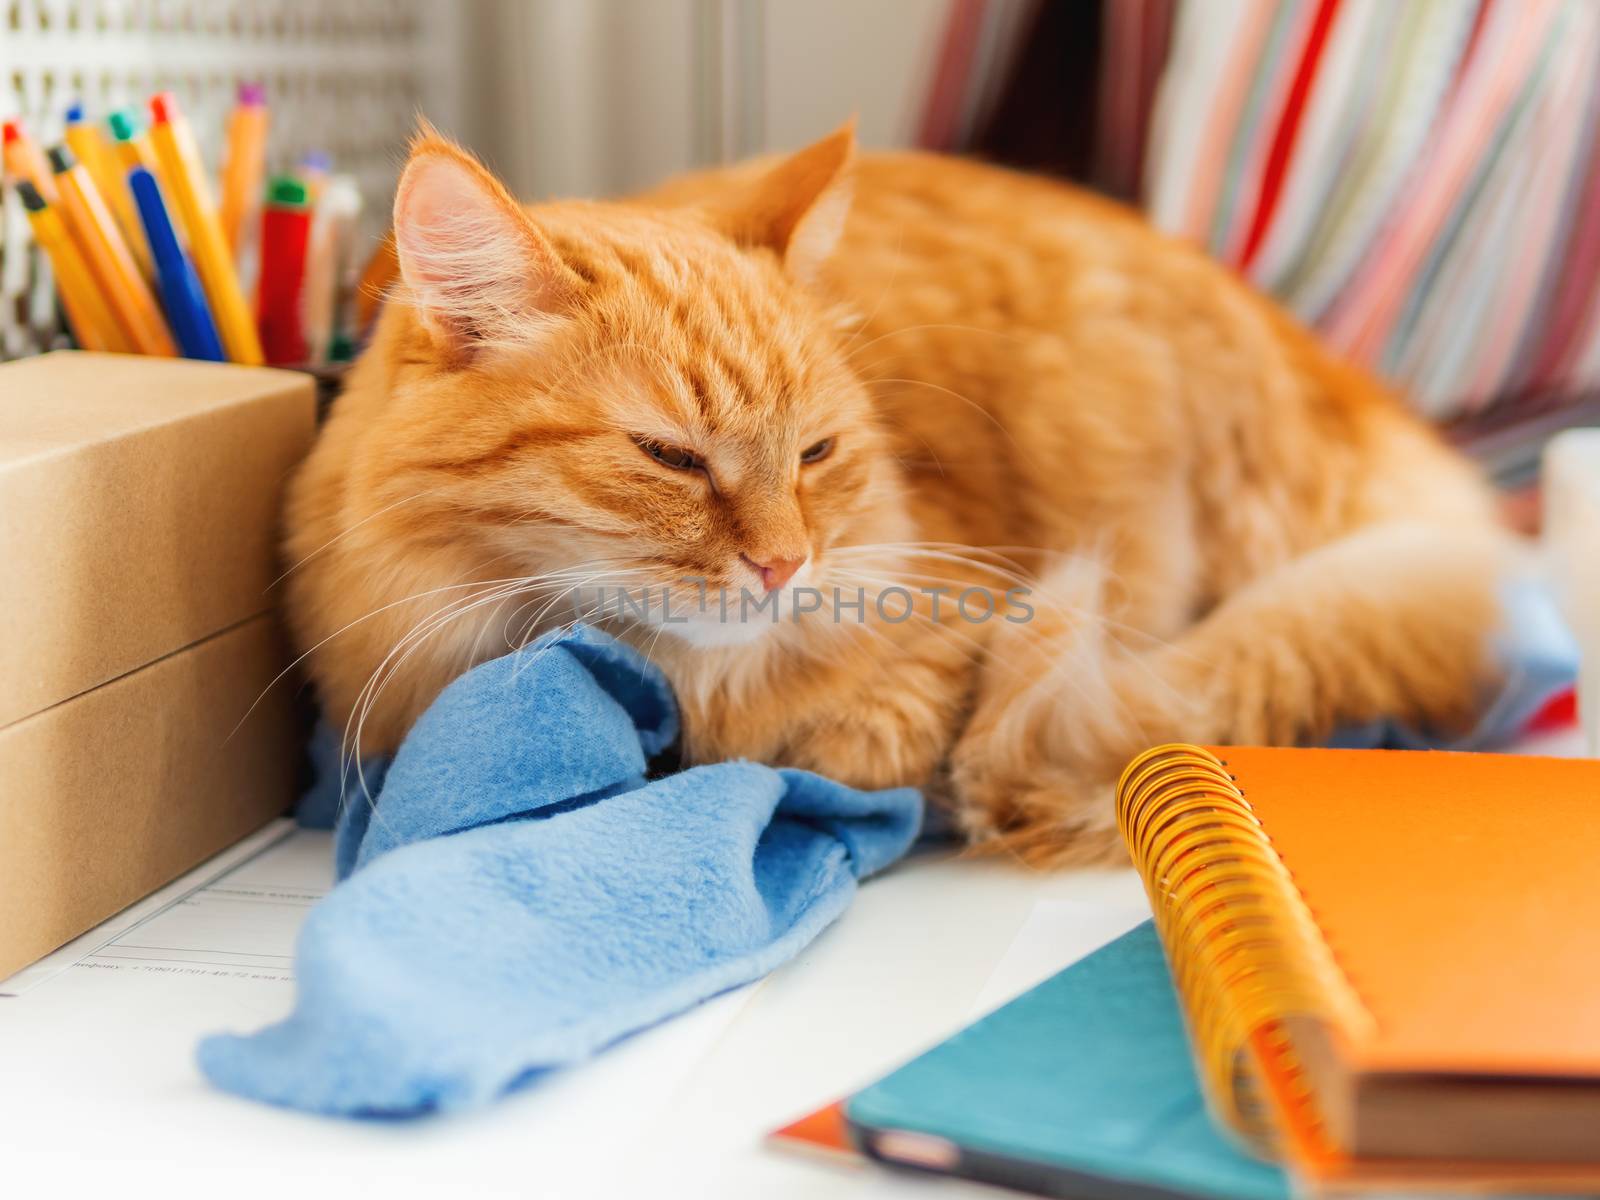 Cute ginger cat is sleeping among office supplies and sewing machine. Fluffy pet dozing on stationery. Cozy home background. by aksenovko